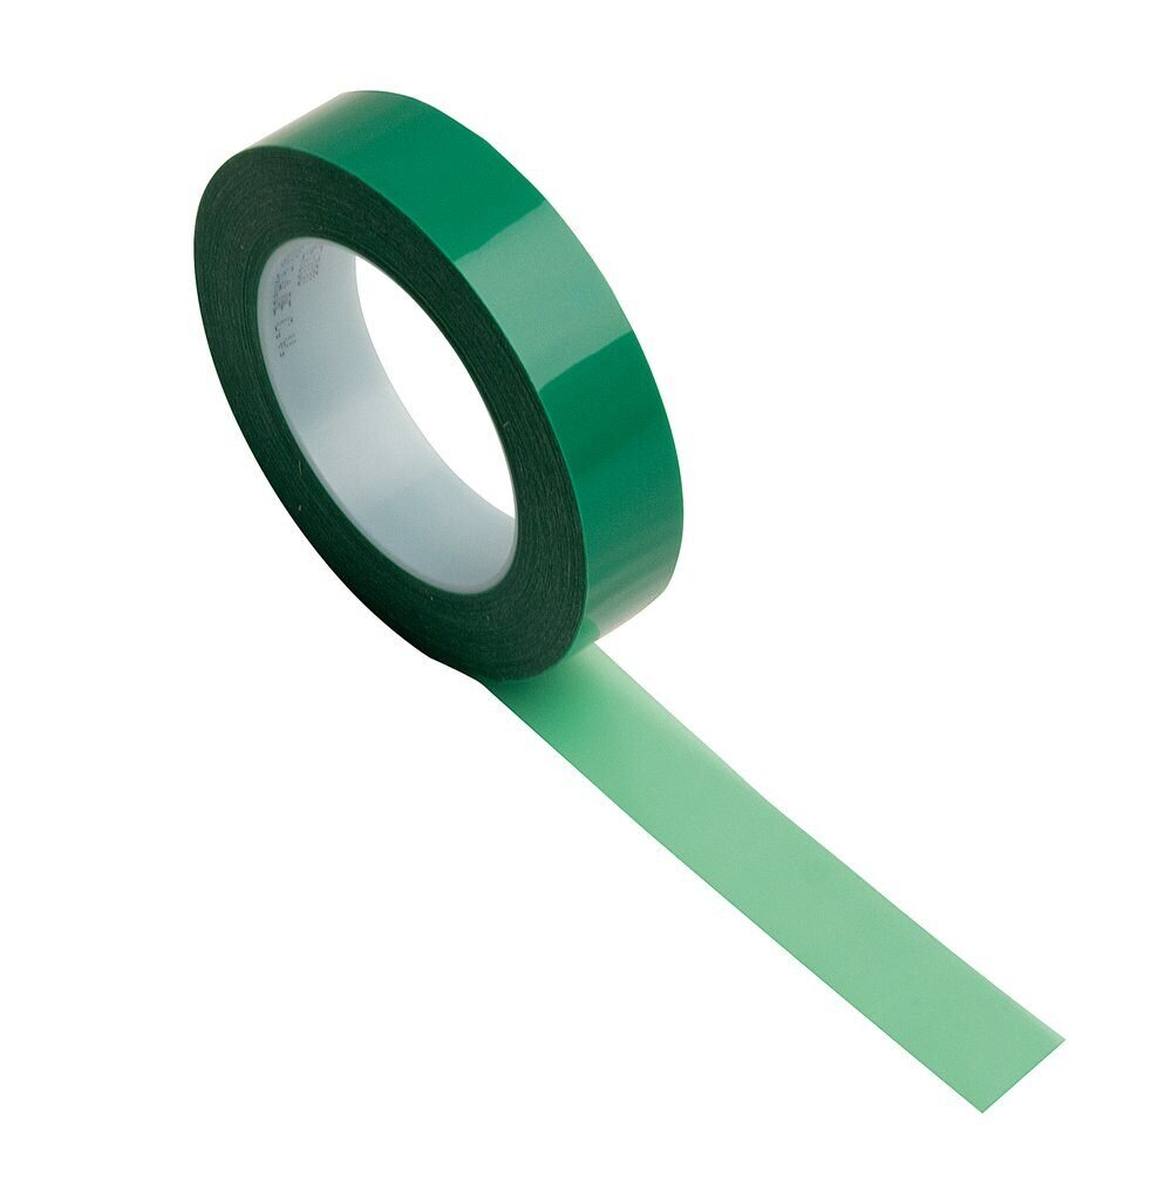 3M High-temperature polyester adhesive tape 851, green, 12.7 mm x 66 m, 101.6 Âµm